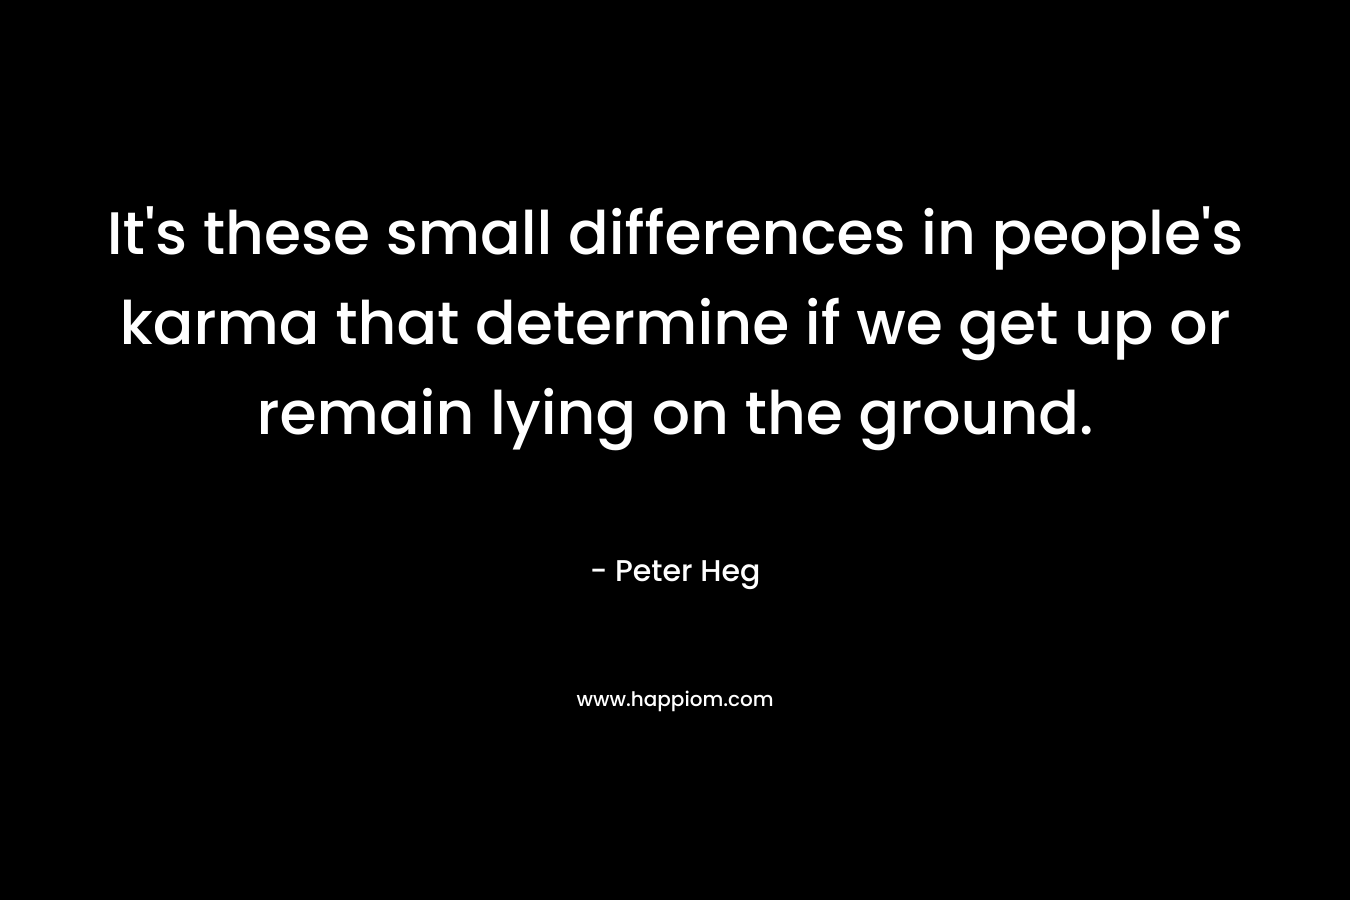 It's these small differences in people's karma that determine if we get up or remain lying on the ground.